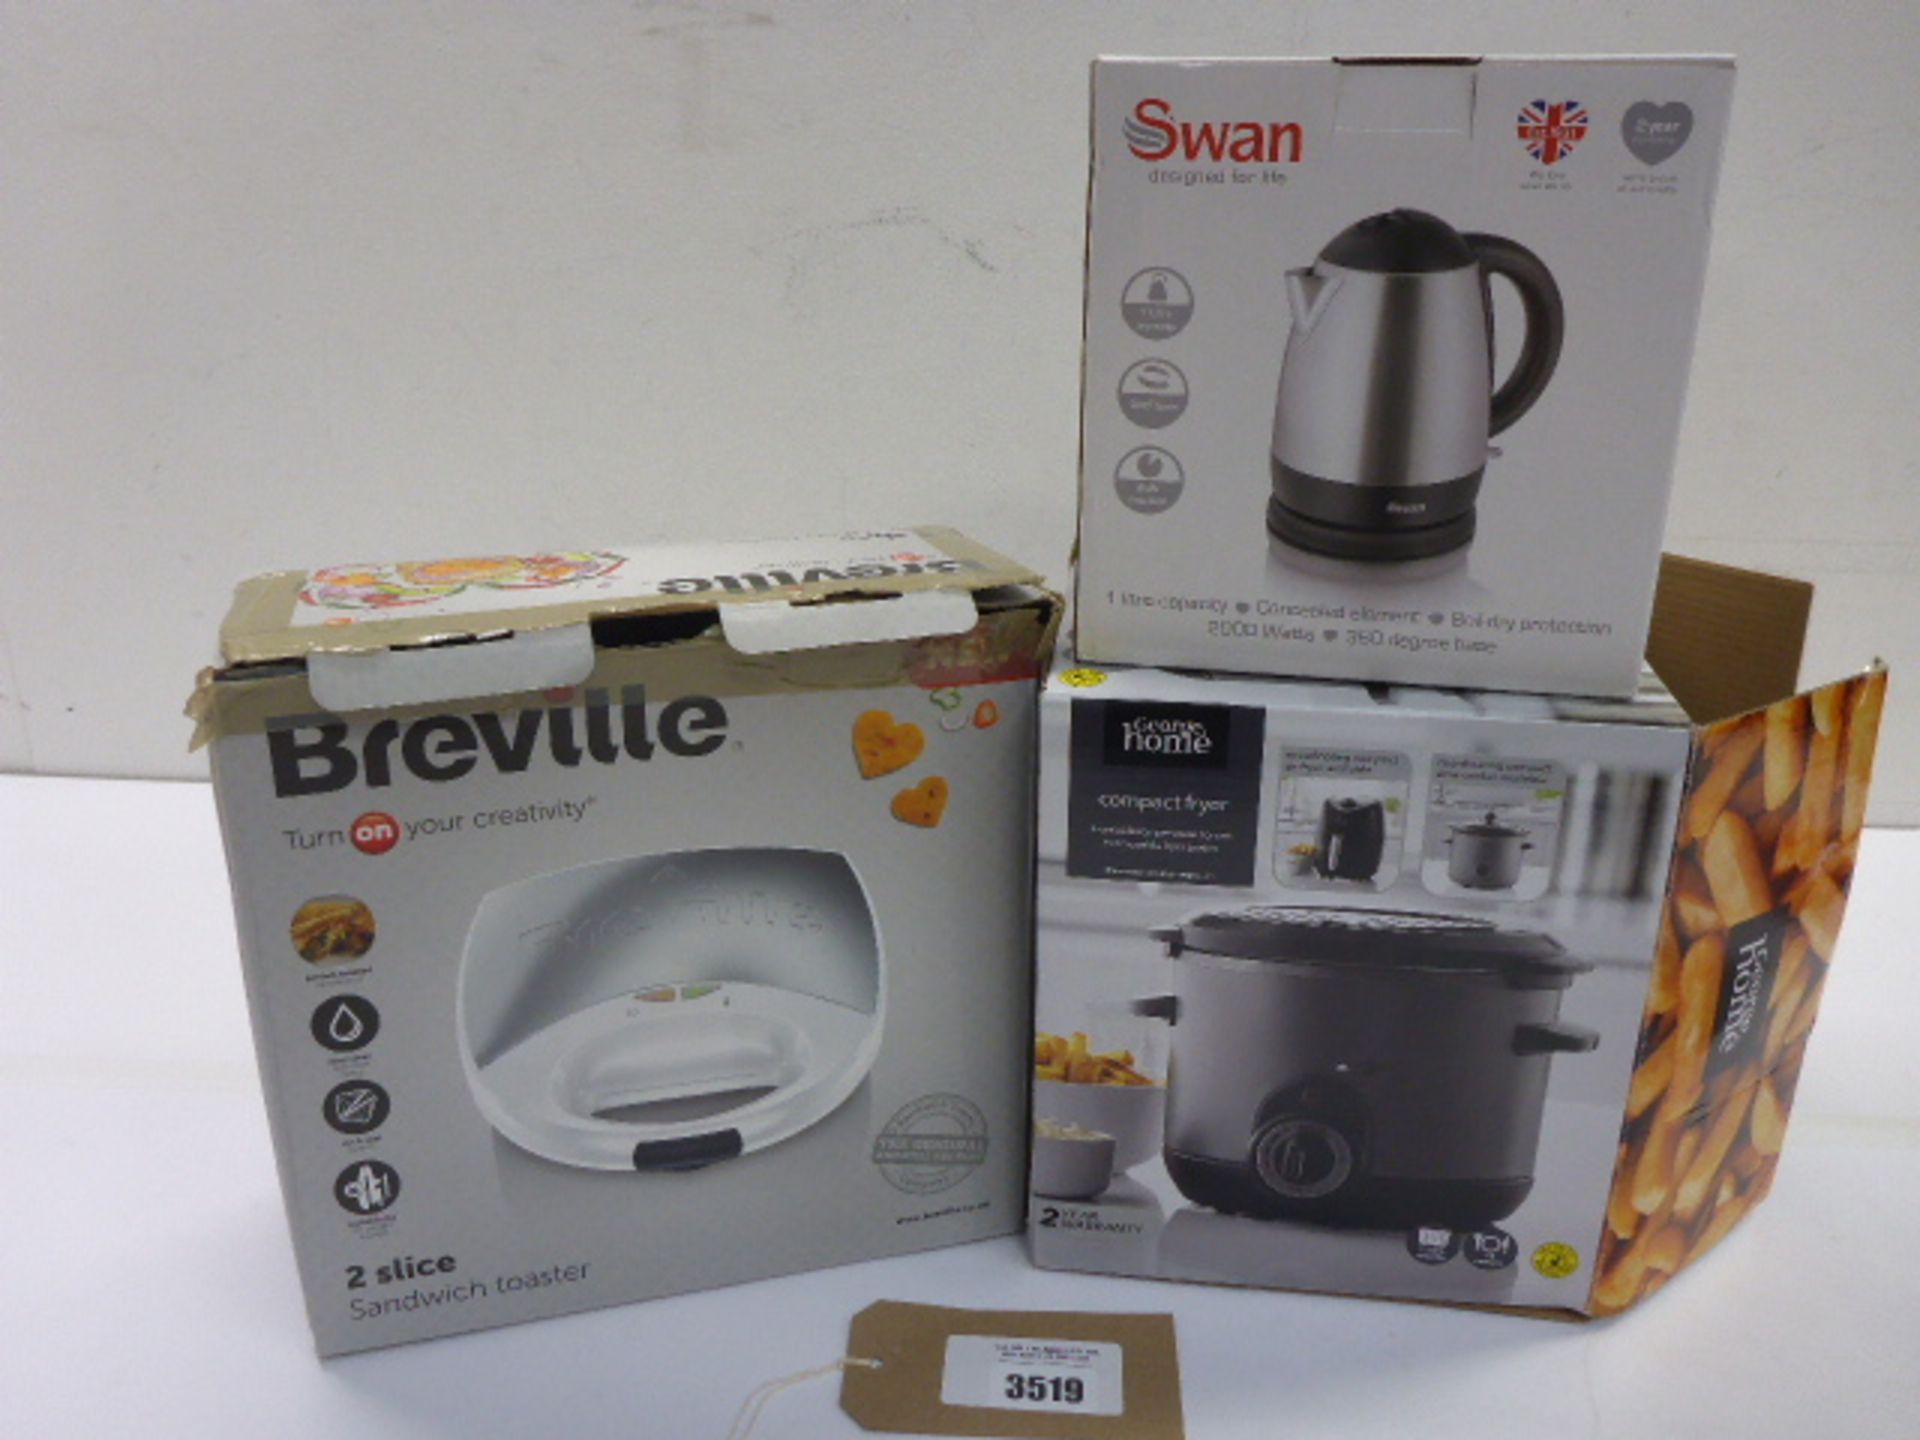 Breville 2 slice sandwich toaster, George compact fryer and Swan 1L kettle